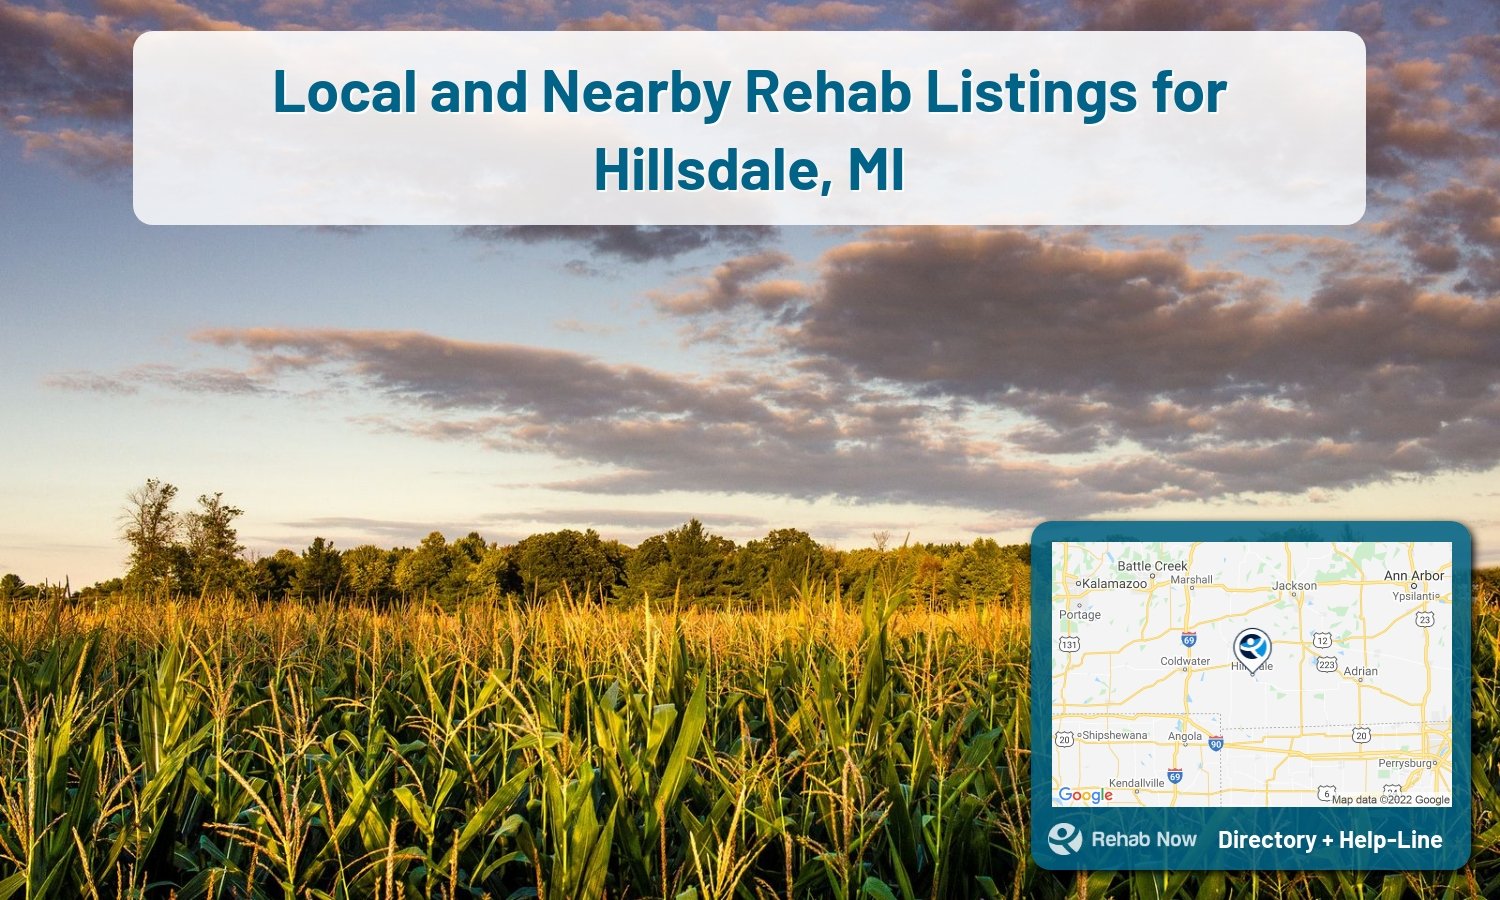 View options, availability, treatment methods, and more, for drug rehab and alcohol treatment in Hillsdale, Michigan